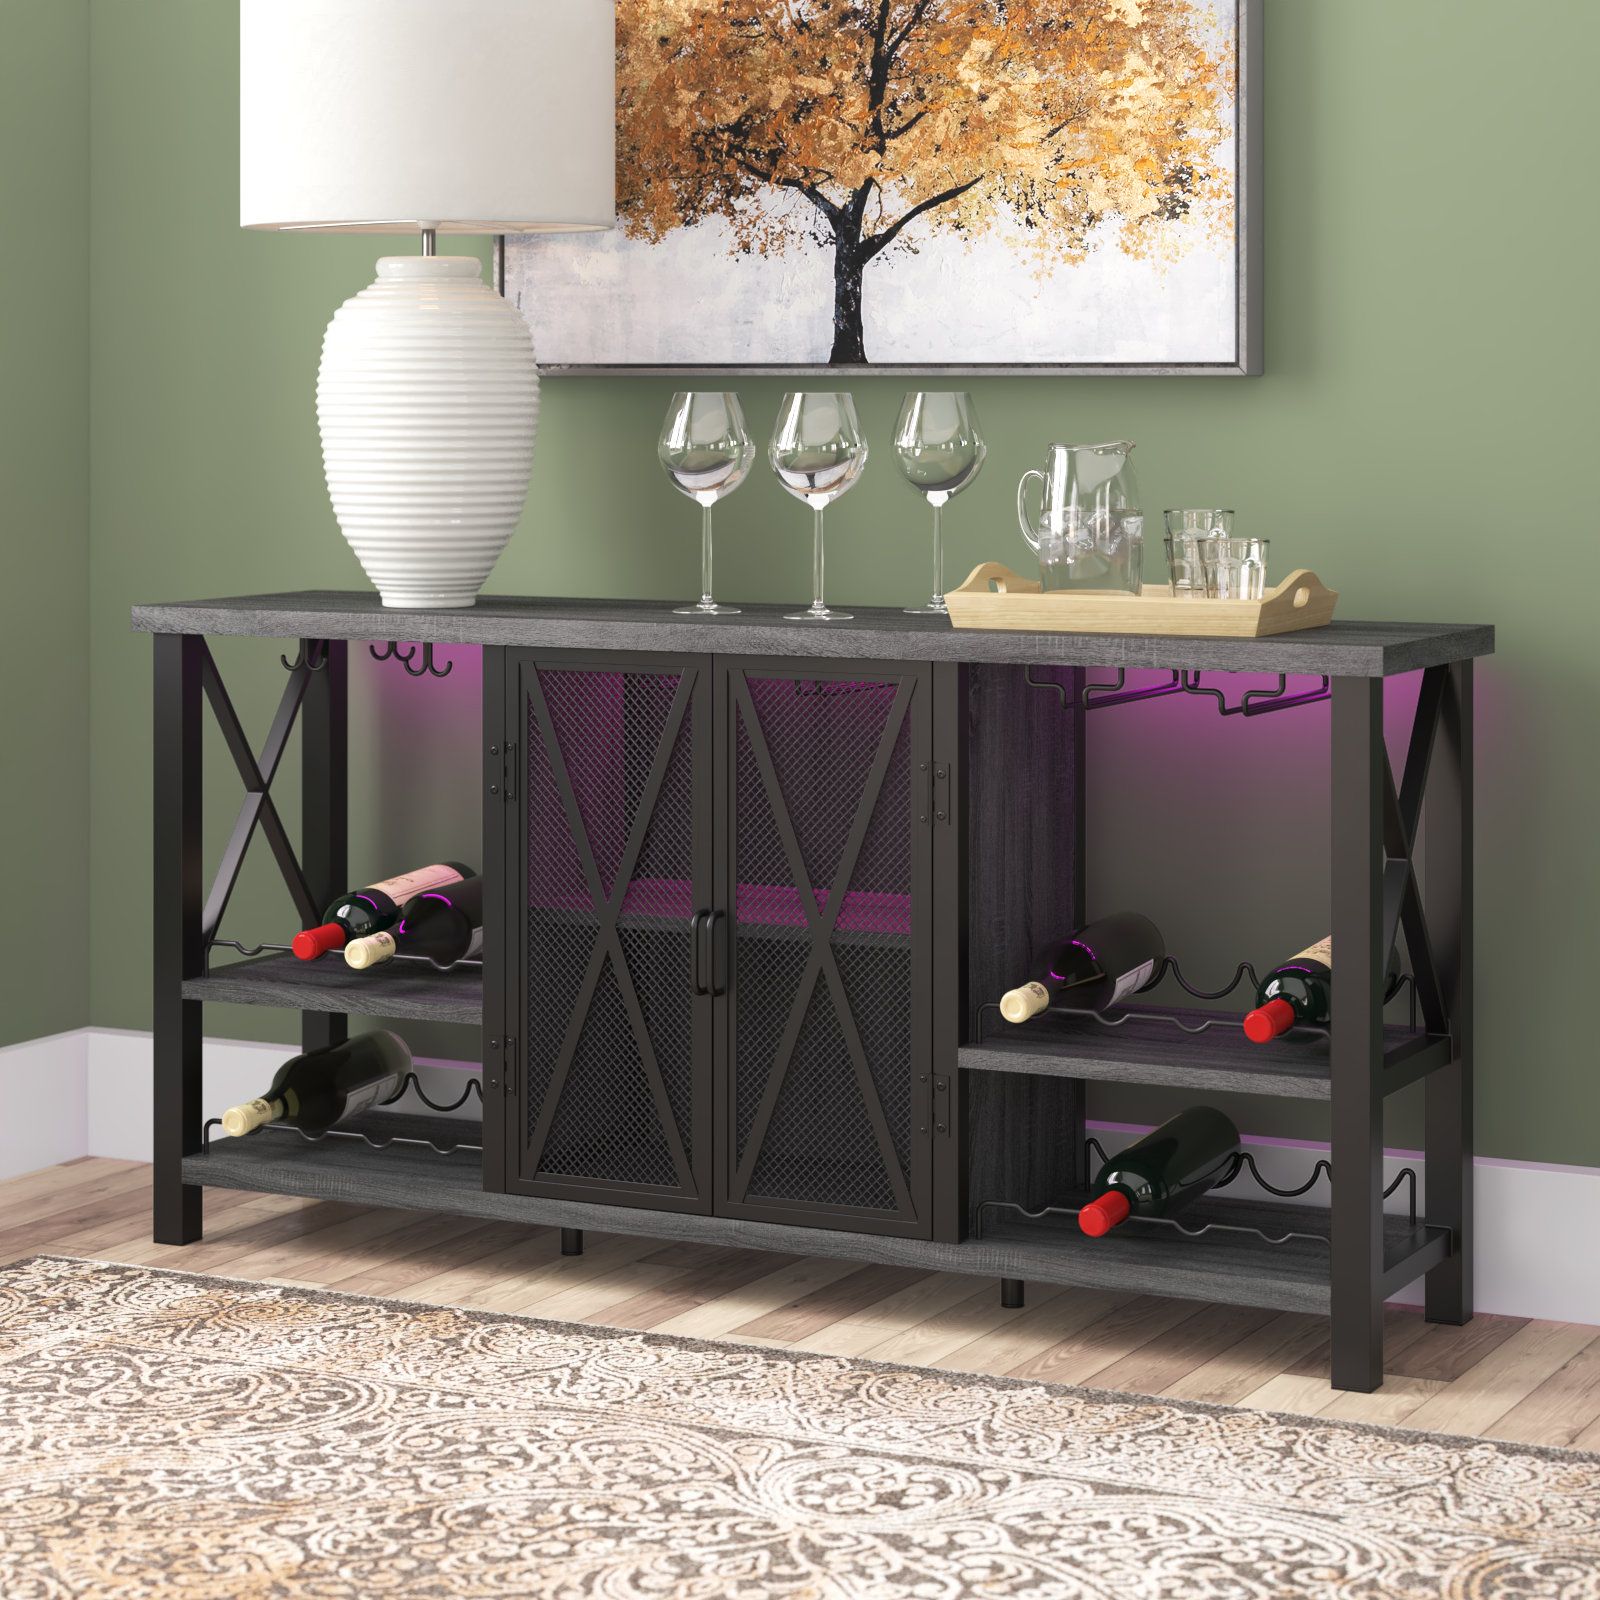 Wade Logan® Sideboard With Led Light And Wine Cabinet & Reviews | Wayfair With Sideboards With Breathable Mesh Doors (View 8 of 20)